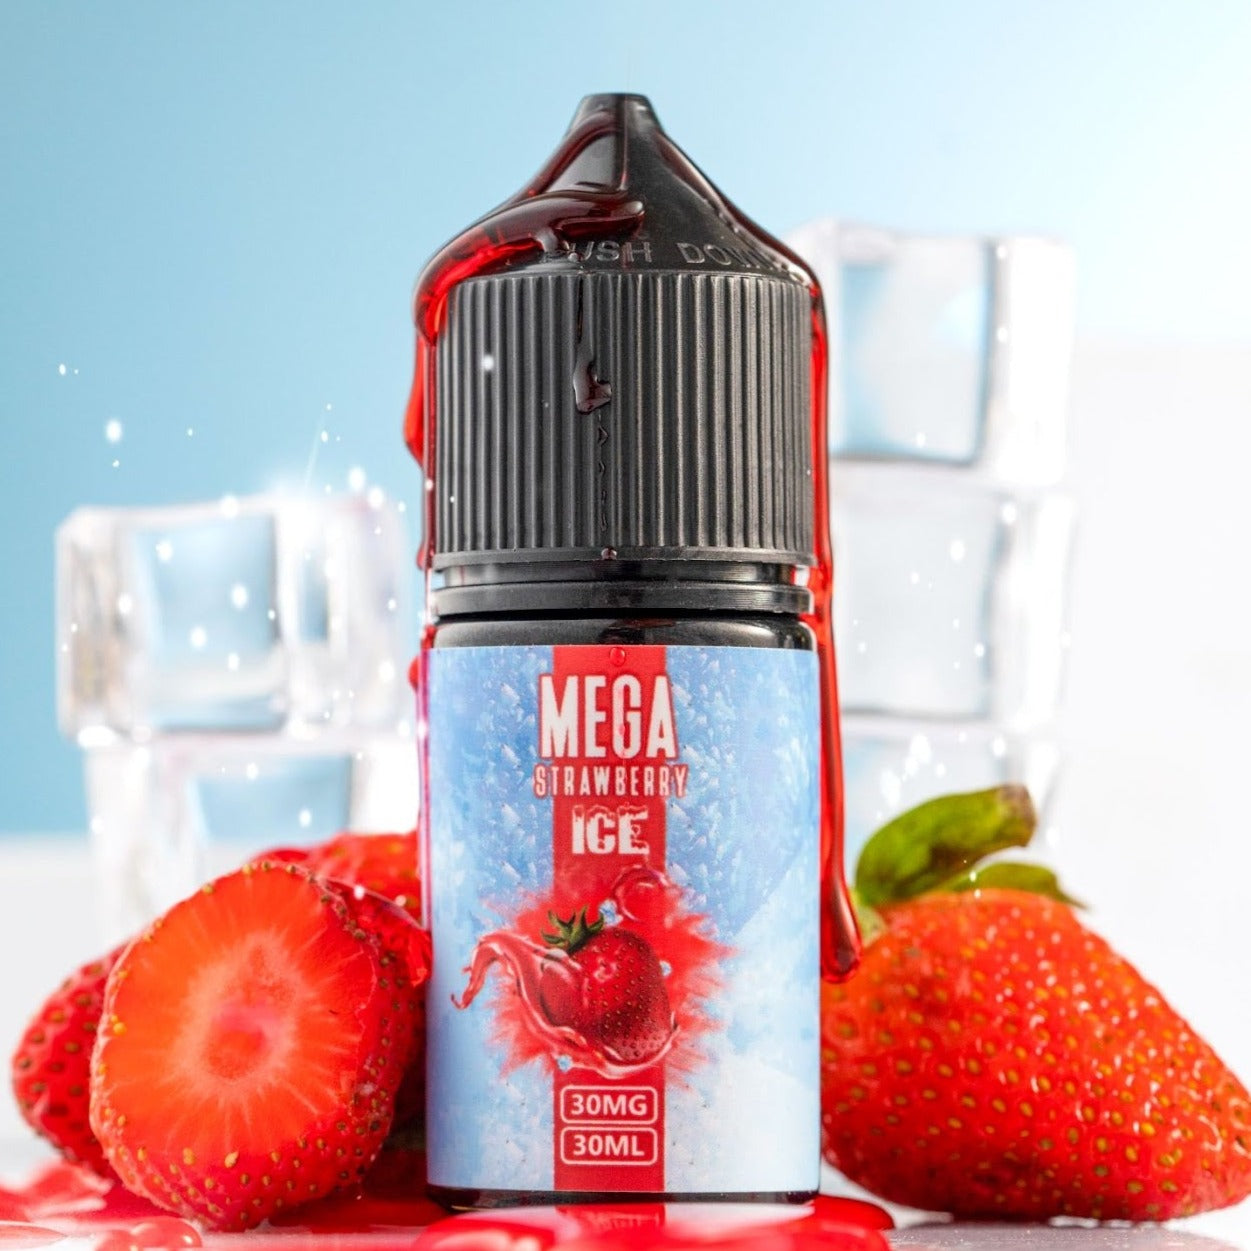 Mega Strawberry Ice Saltnic by GRAND - A delightful blend of sweet strawberries and refreshing icy notes for a cool vaping experience.